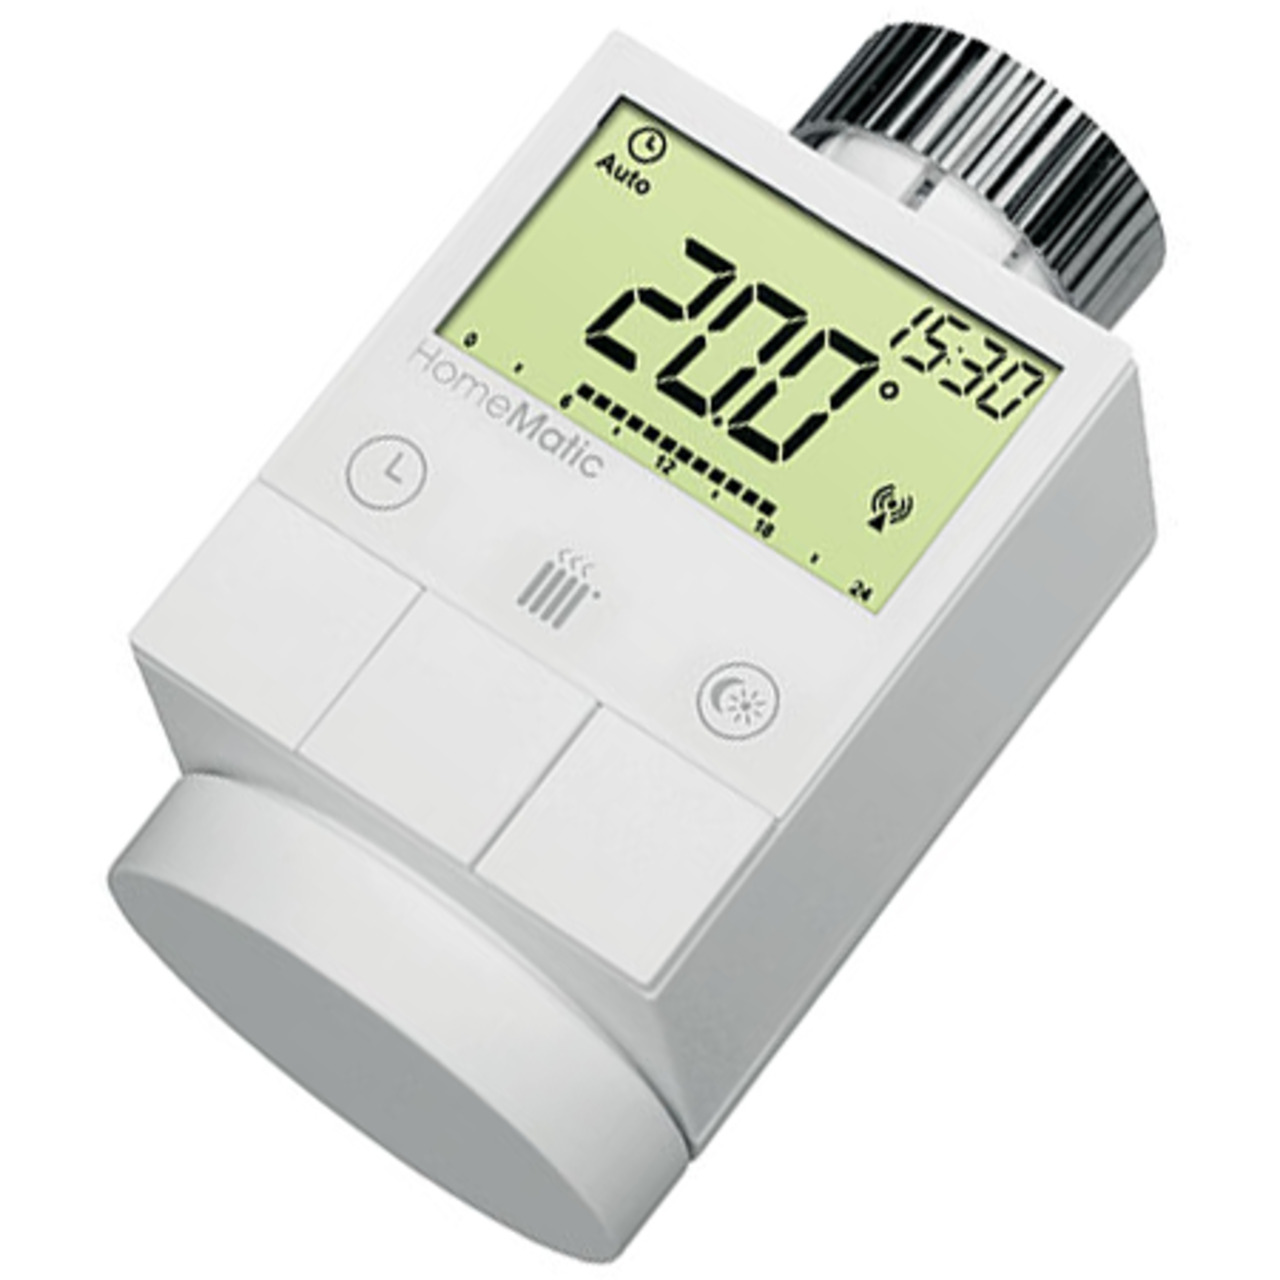 Homematic Funk-Heizkrperthermostat HM-CC-RT-DN fr Smart Home - Hausautomation 